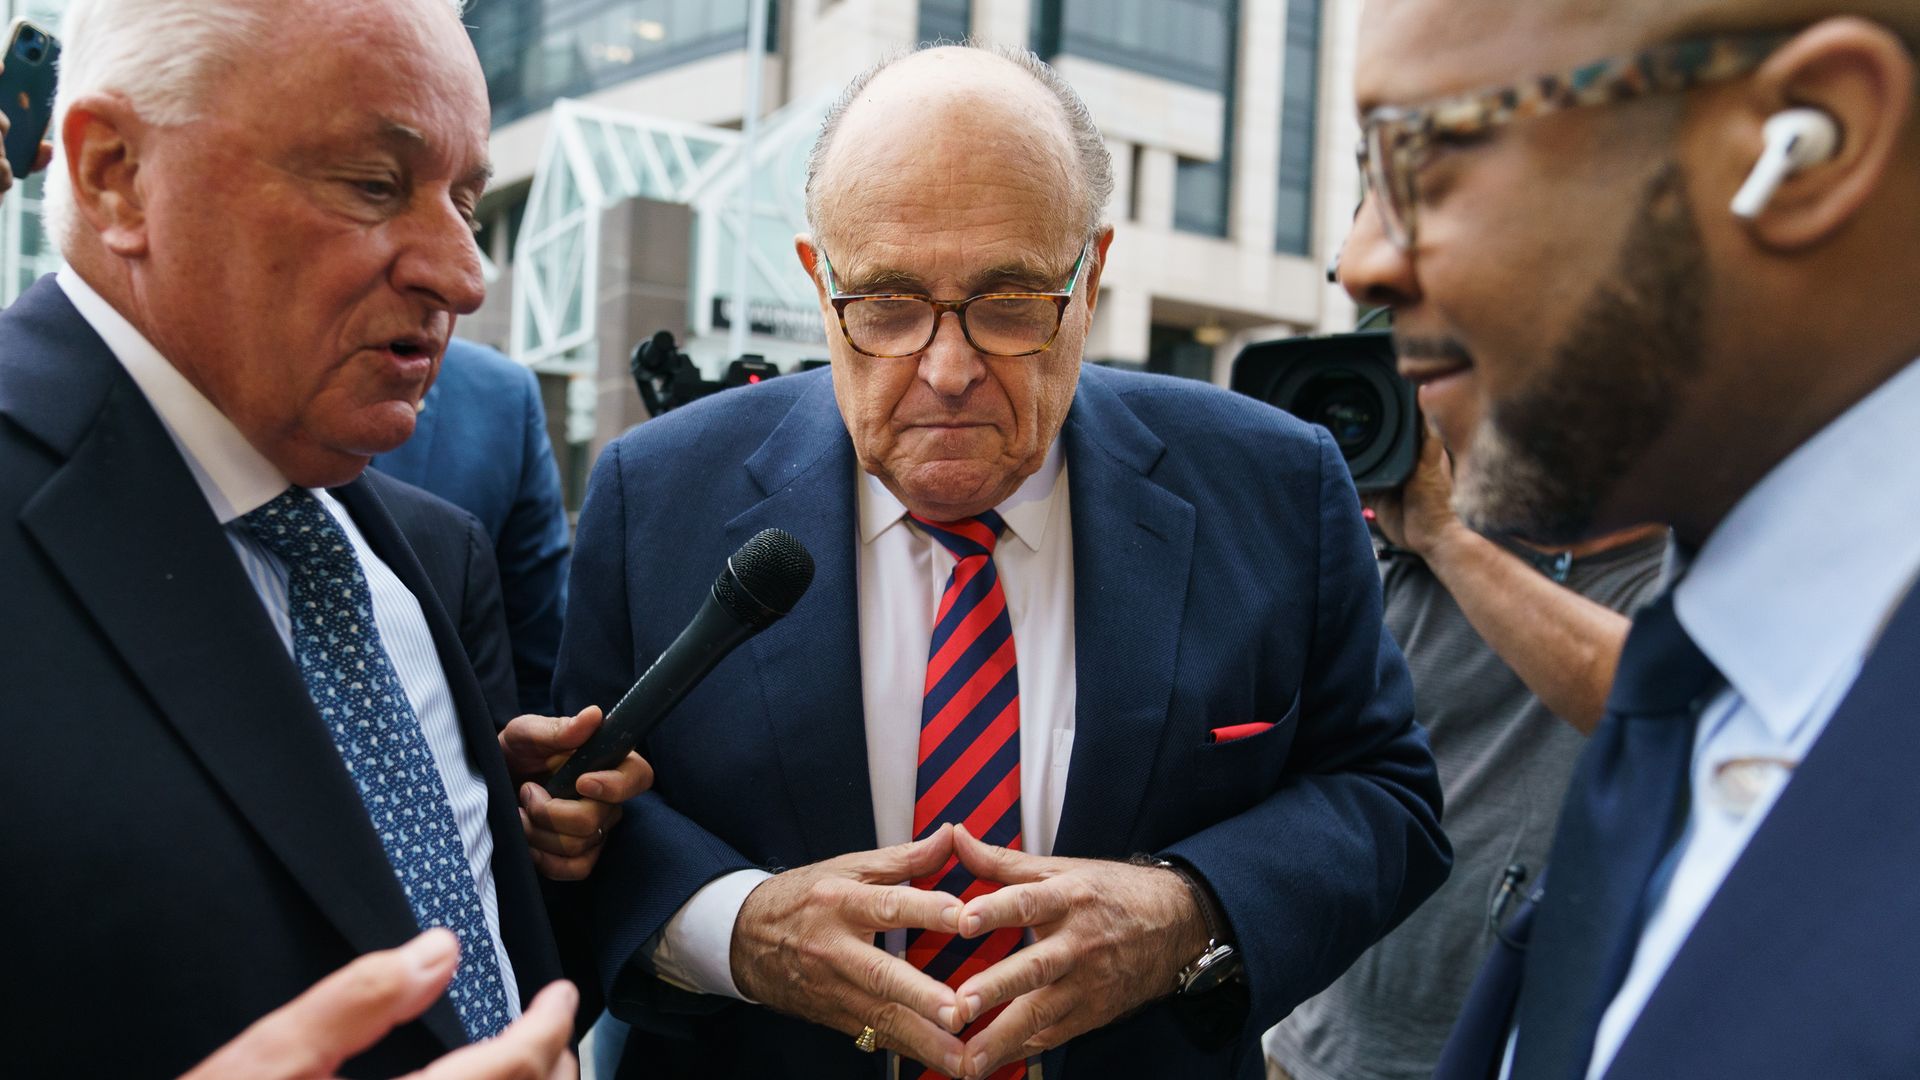 Rudy Giuiliani stands between two men and looks down with his fingers touching 